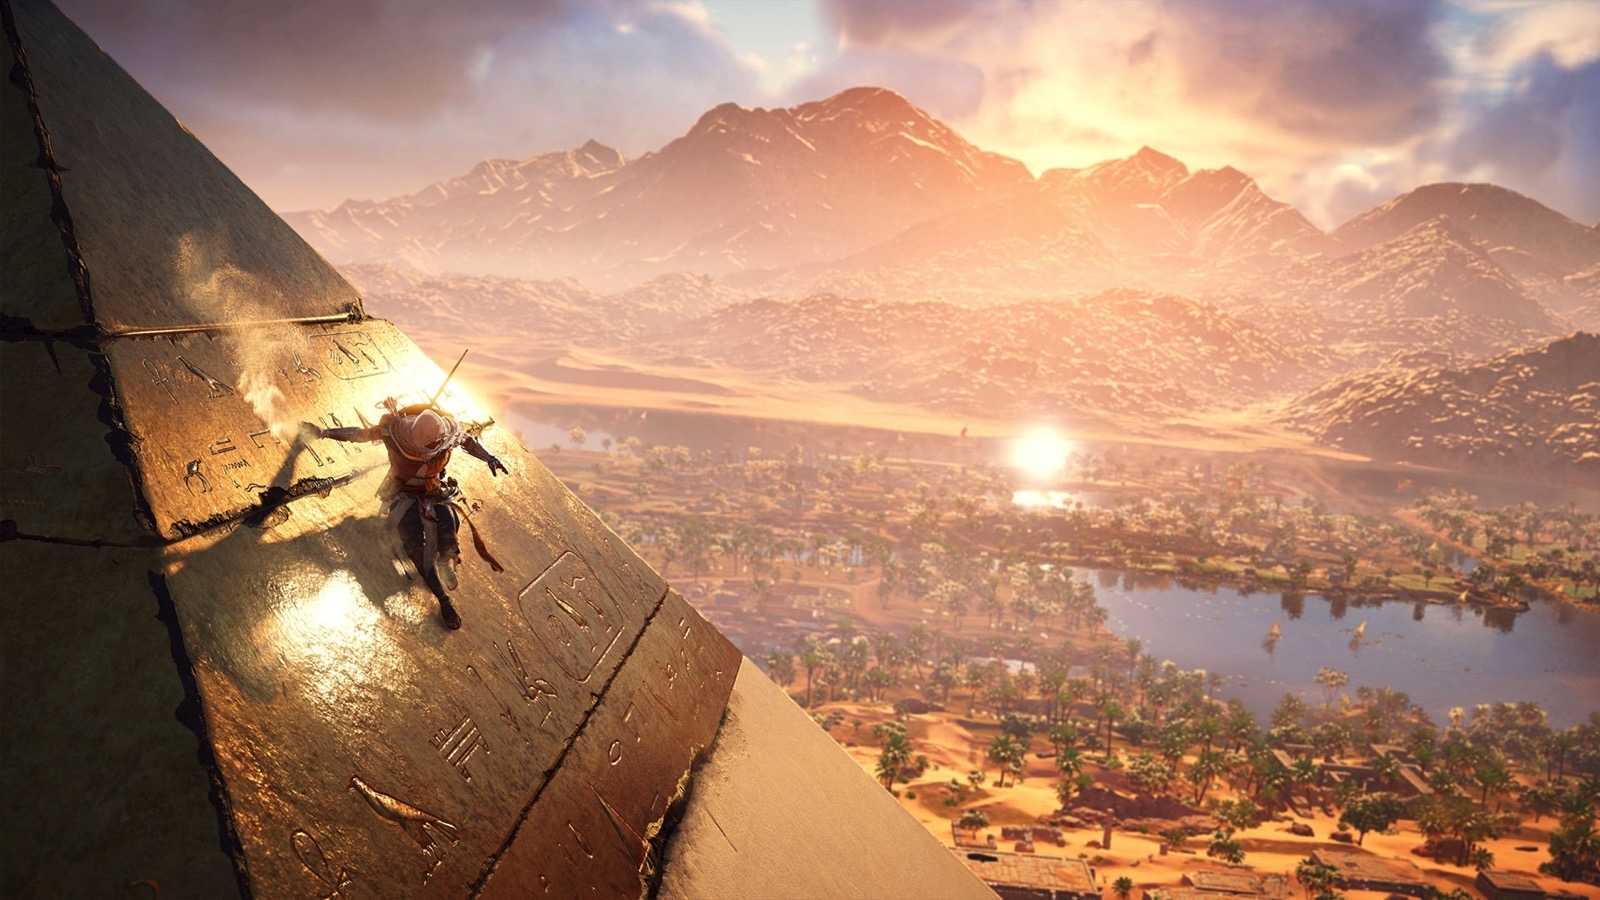 ‘Assassin’s Creed’ trailer reveals mysterious Egyptian enemies | DeviceDaily.com